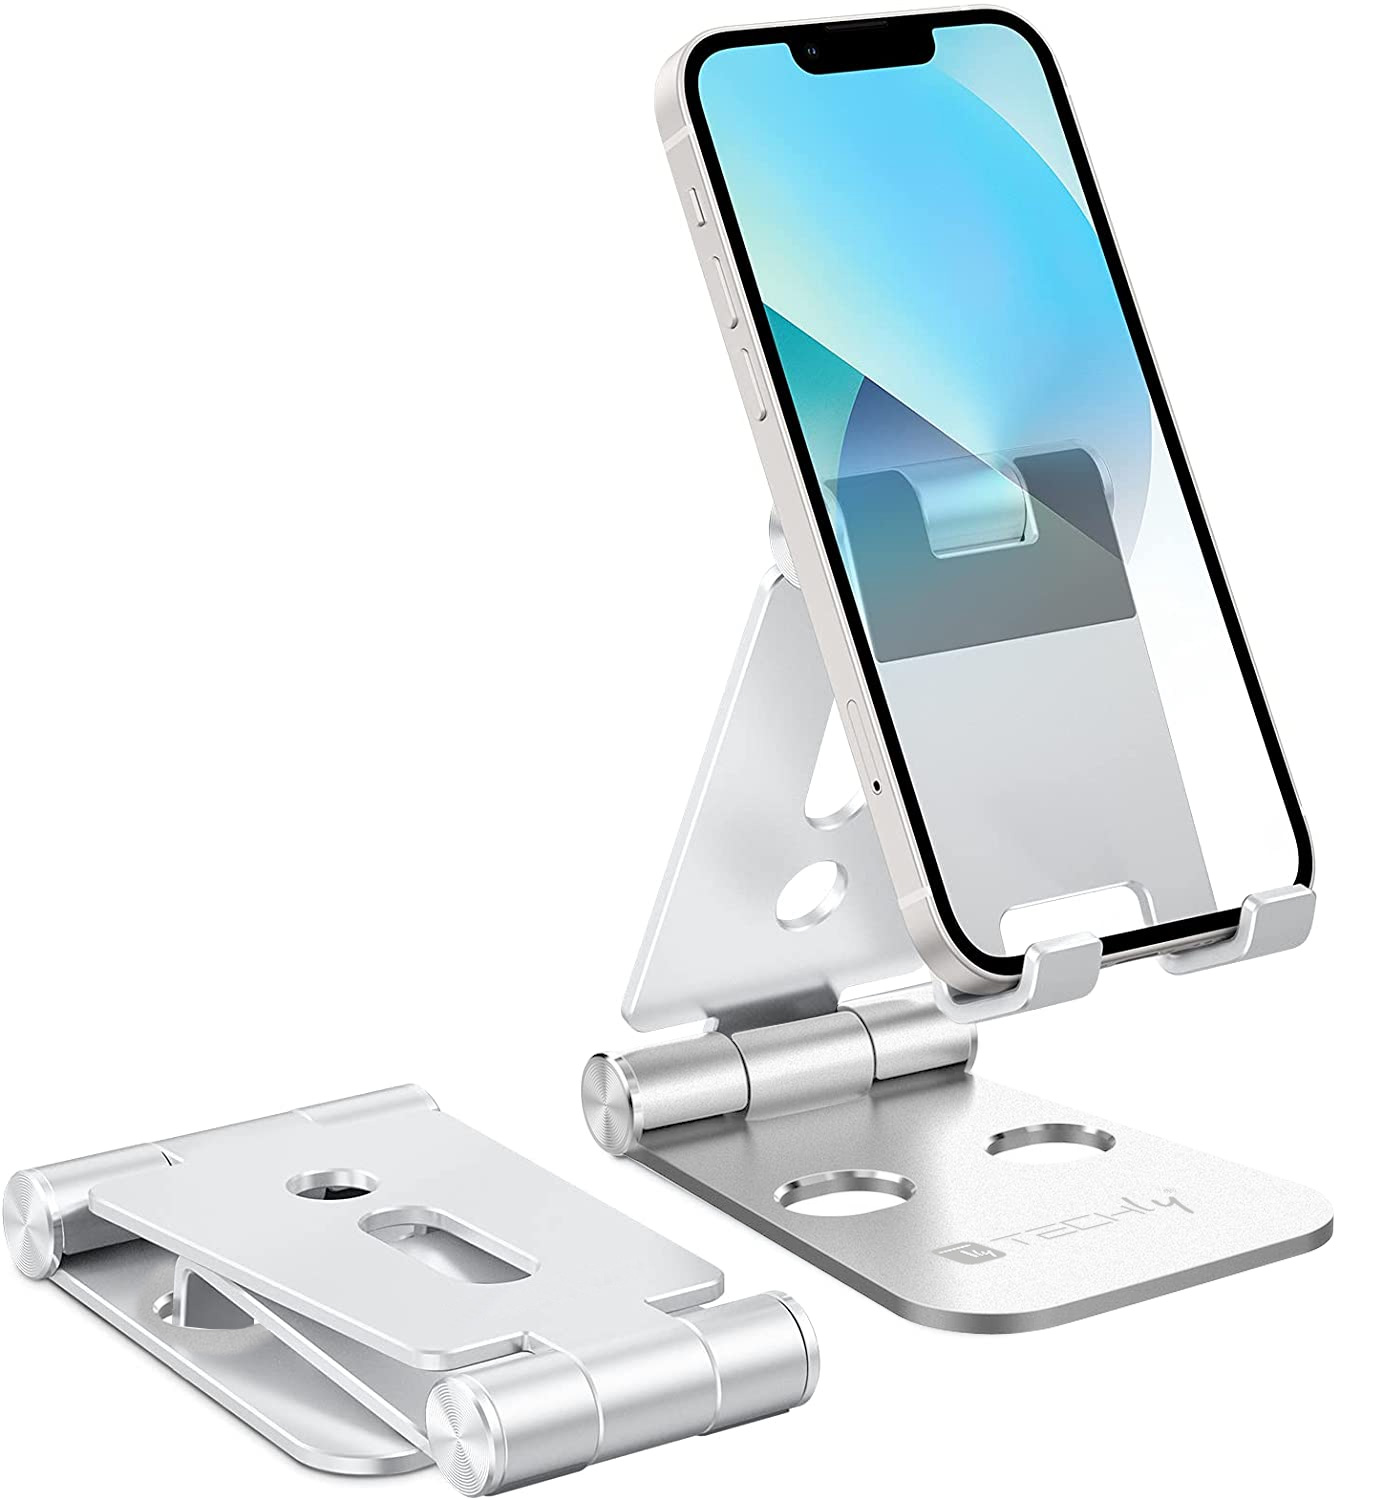 Tablet Computers Phone Holder Mobile Phone Holder Mobile Phone Holder with USB Charging Port Adjustable Angle Desktop Phone Holder 4-10 inches iPad Suitable for iPhone 